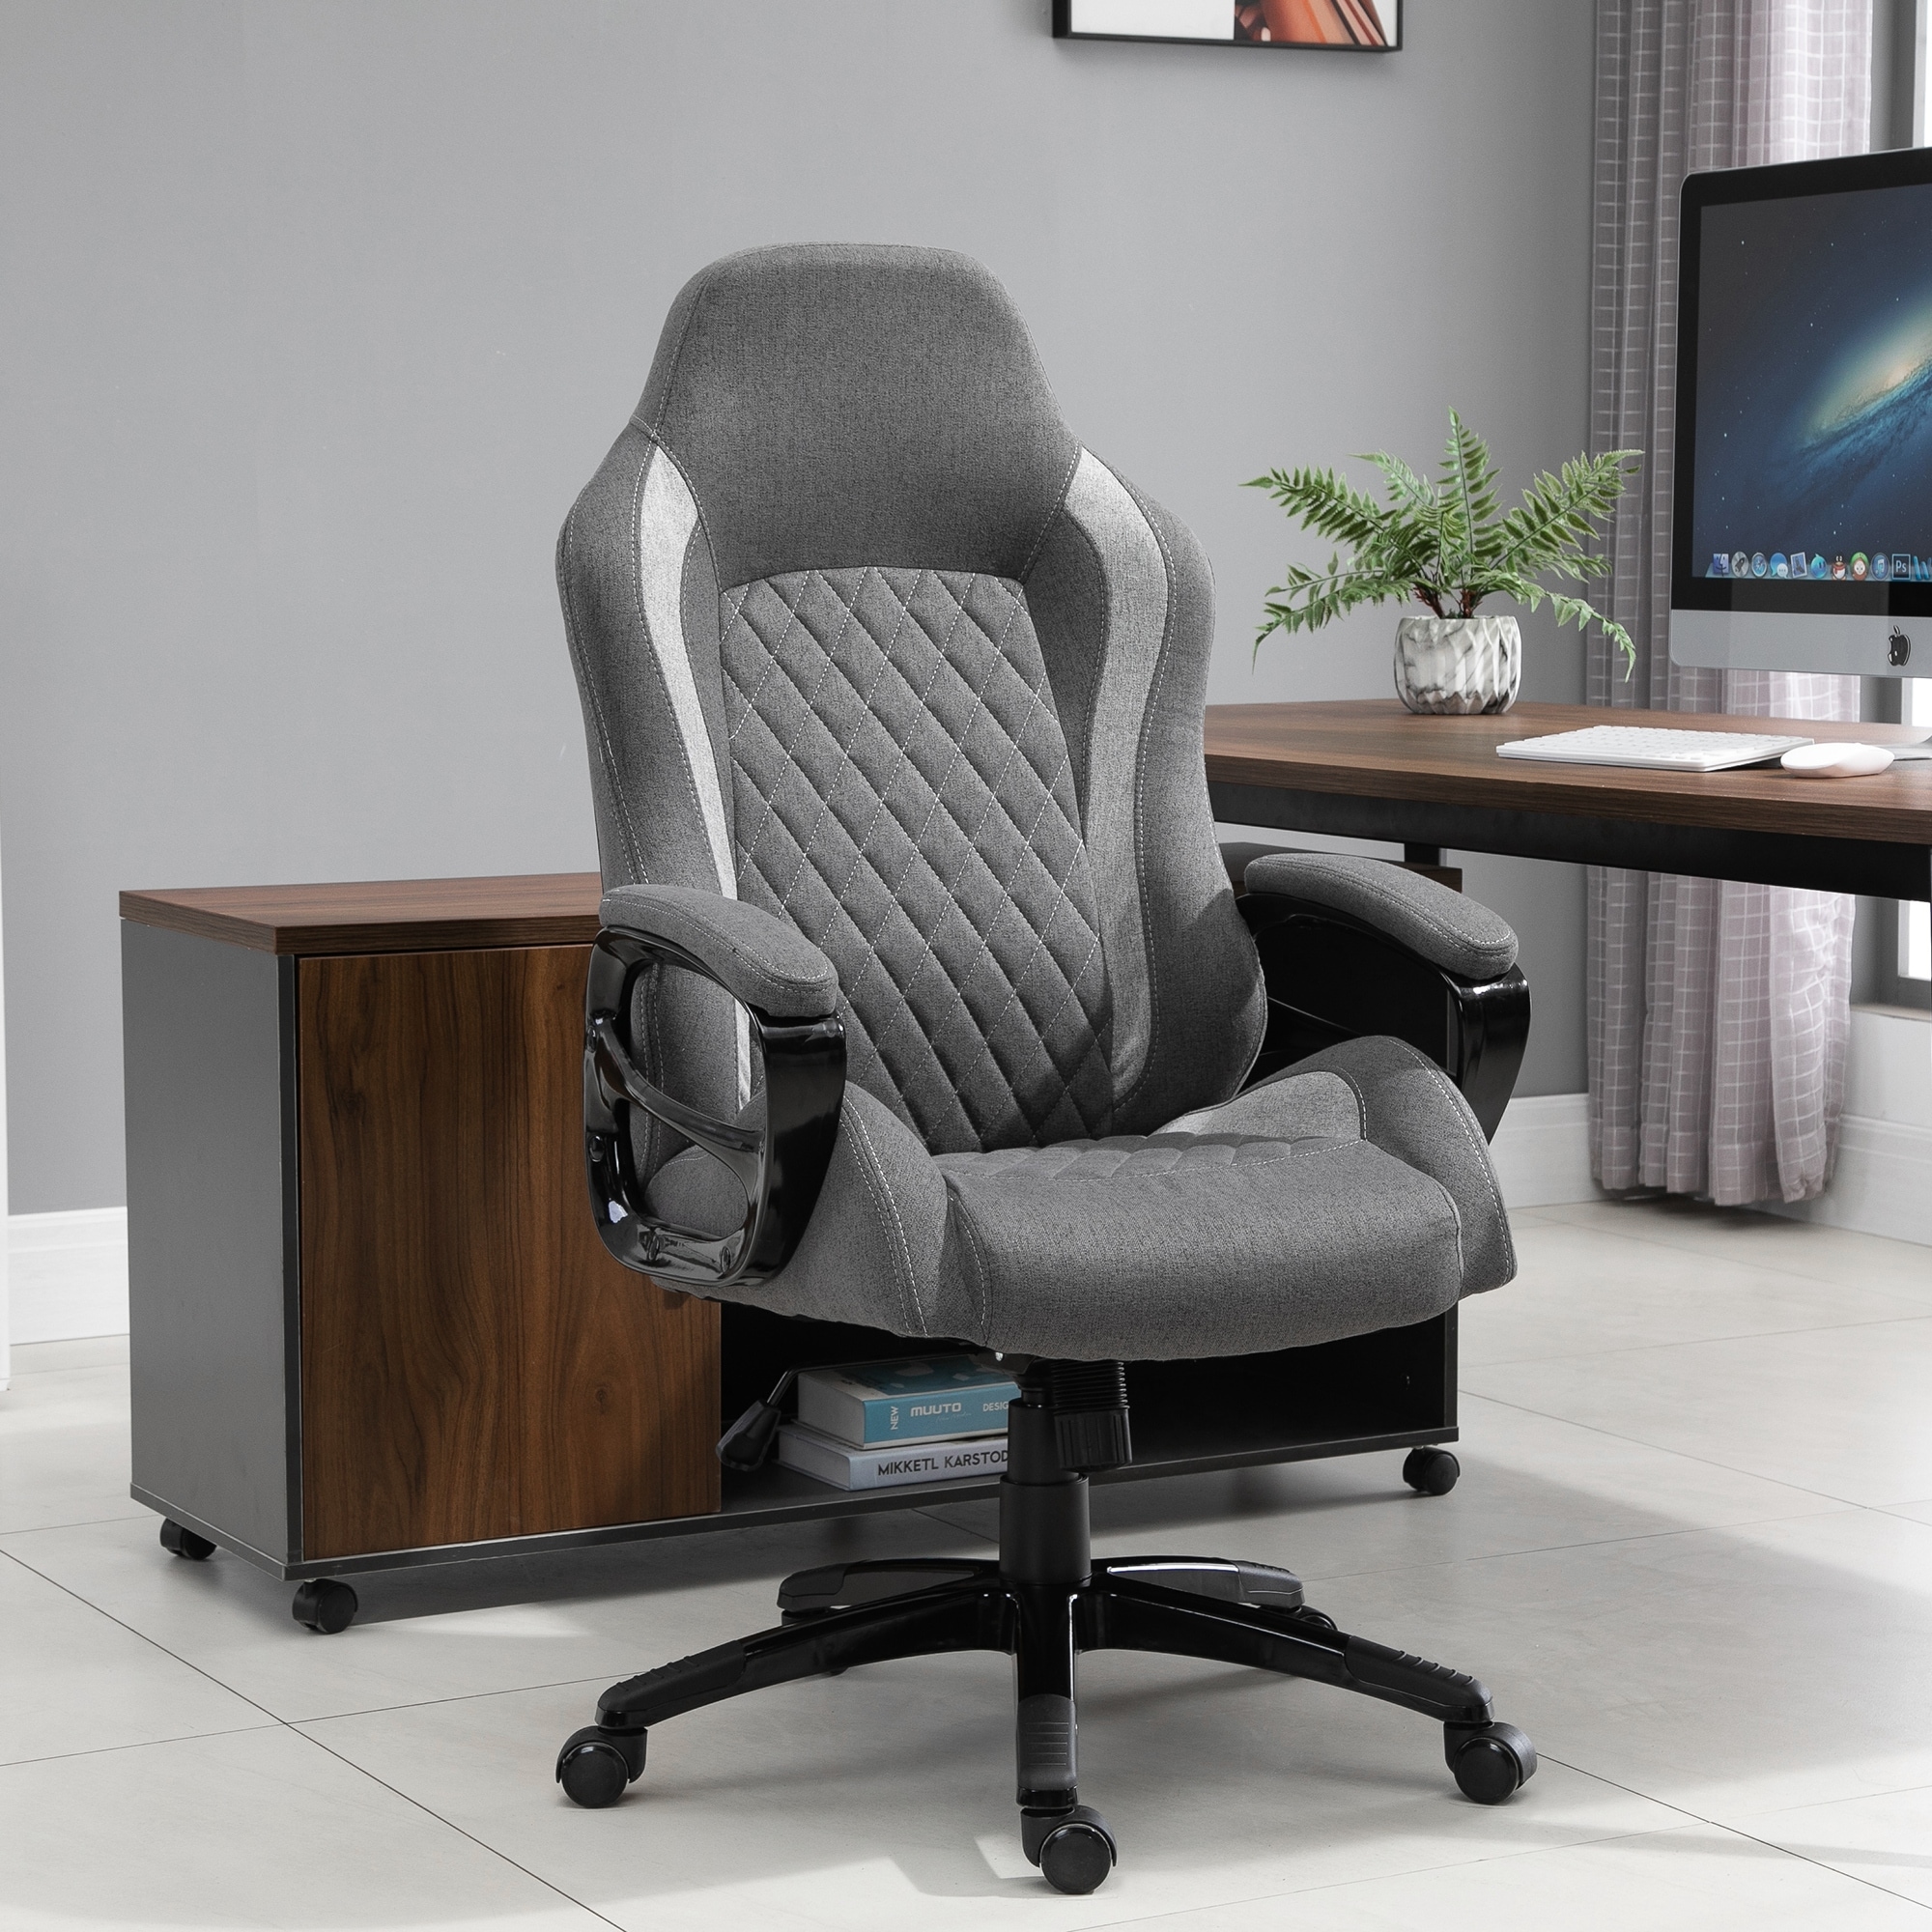 https://ak1.ostkcdn.com/images/products/is/images/direct/7fb4f78db4c0f2a4fe50a623f88f09117b56ffe1/Vinsetto-Ergonomic-Office-Chair-Adjustable-Height-Fabric-Rocker-360%C2%B0-Swivel-Home-Desk-Chair%2C-Grey.jpg